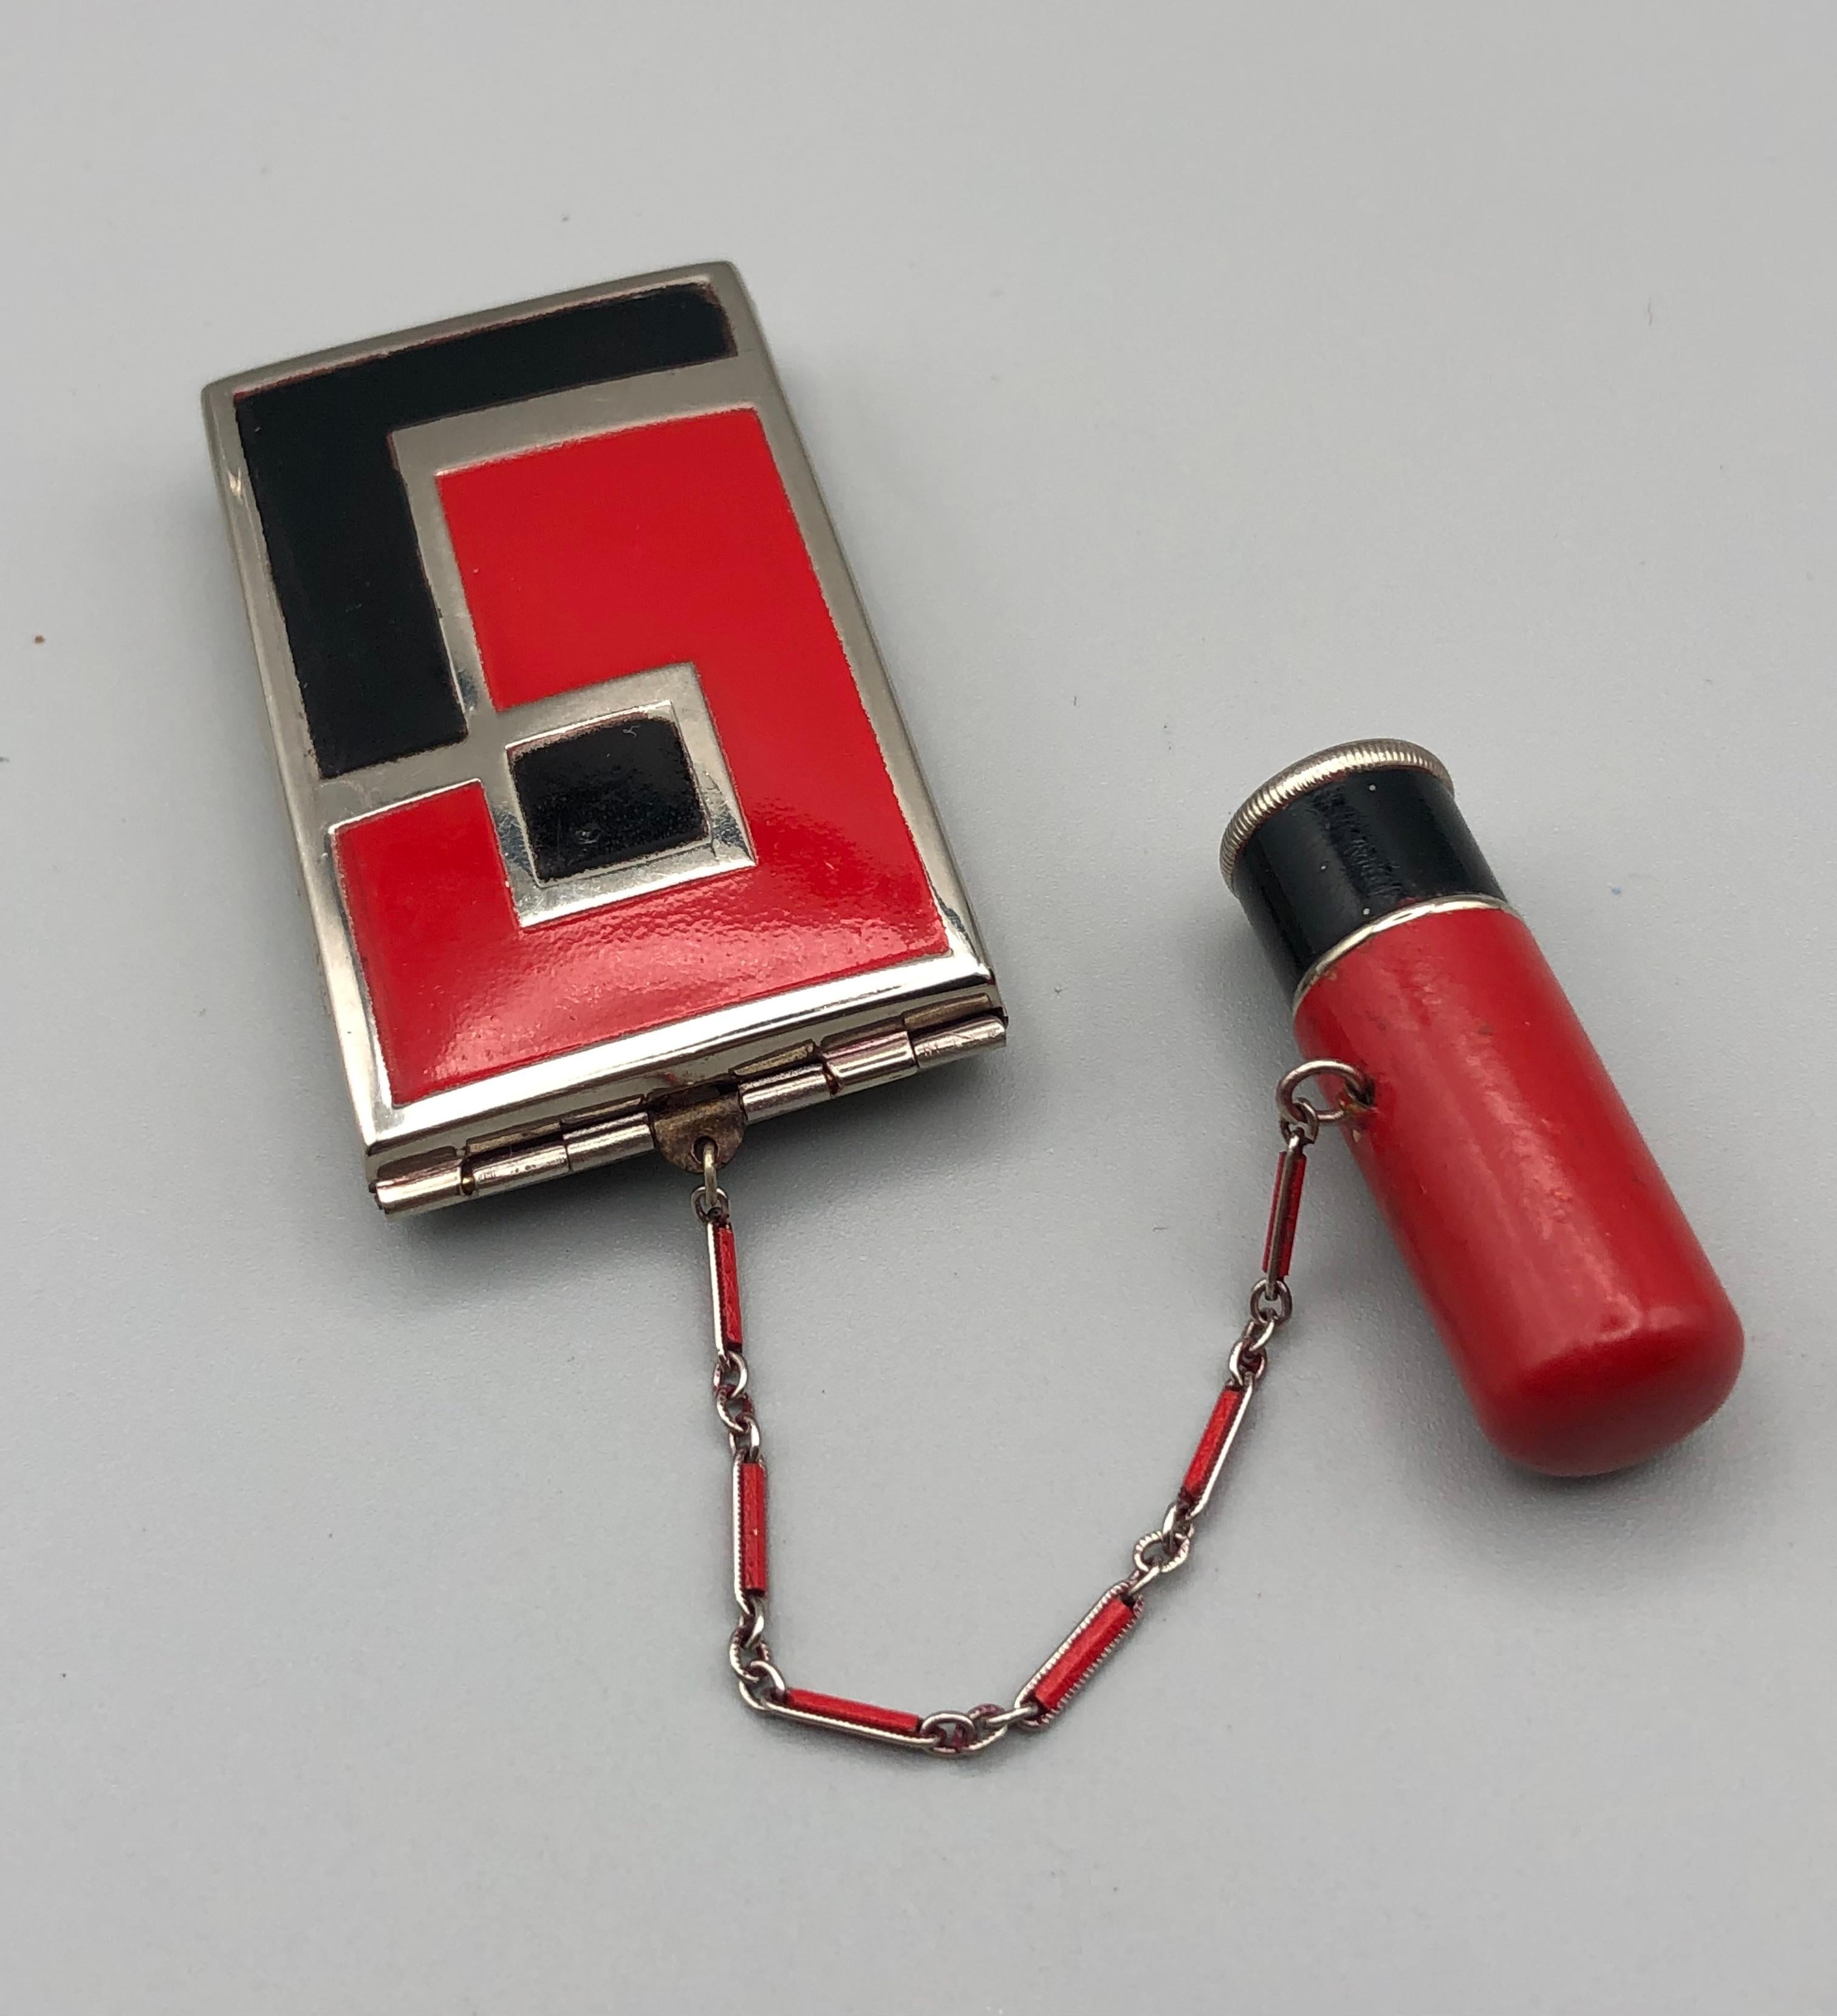 Red & Black Enamel Art Deco Powder Compact by Deere The Reich-Ash Corp 1920’s For Sale 3